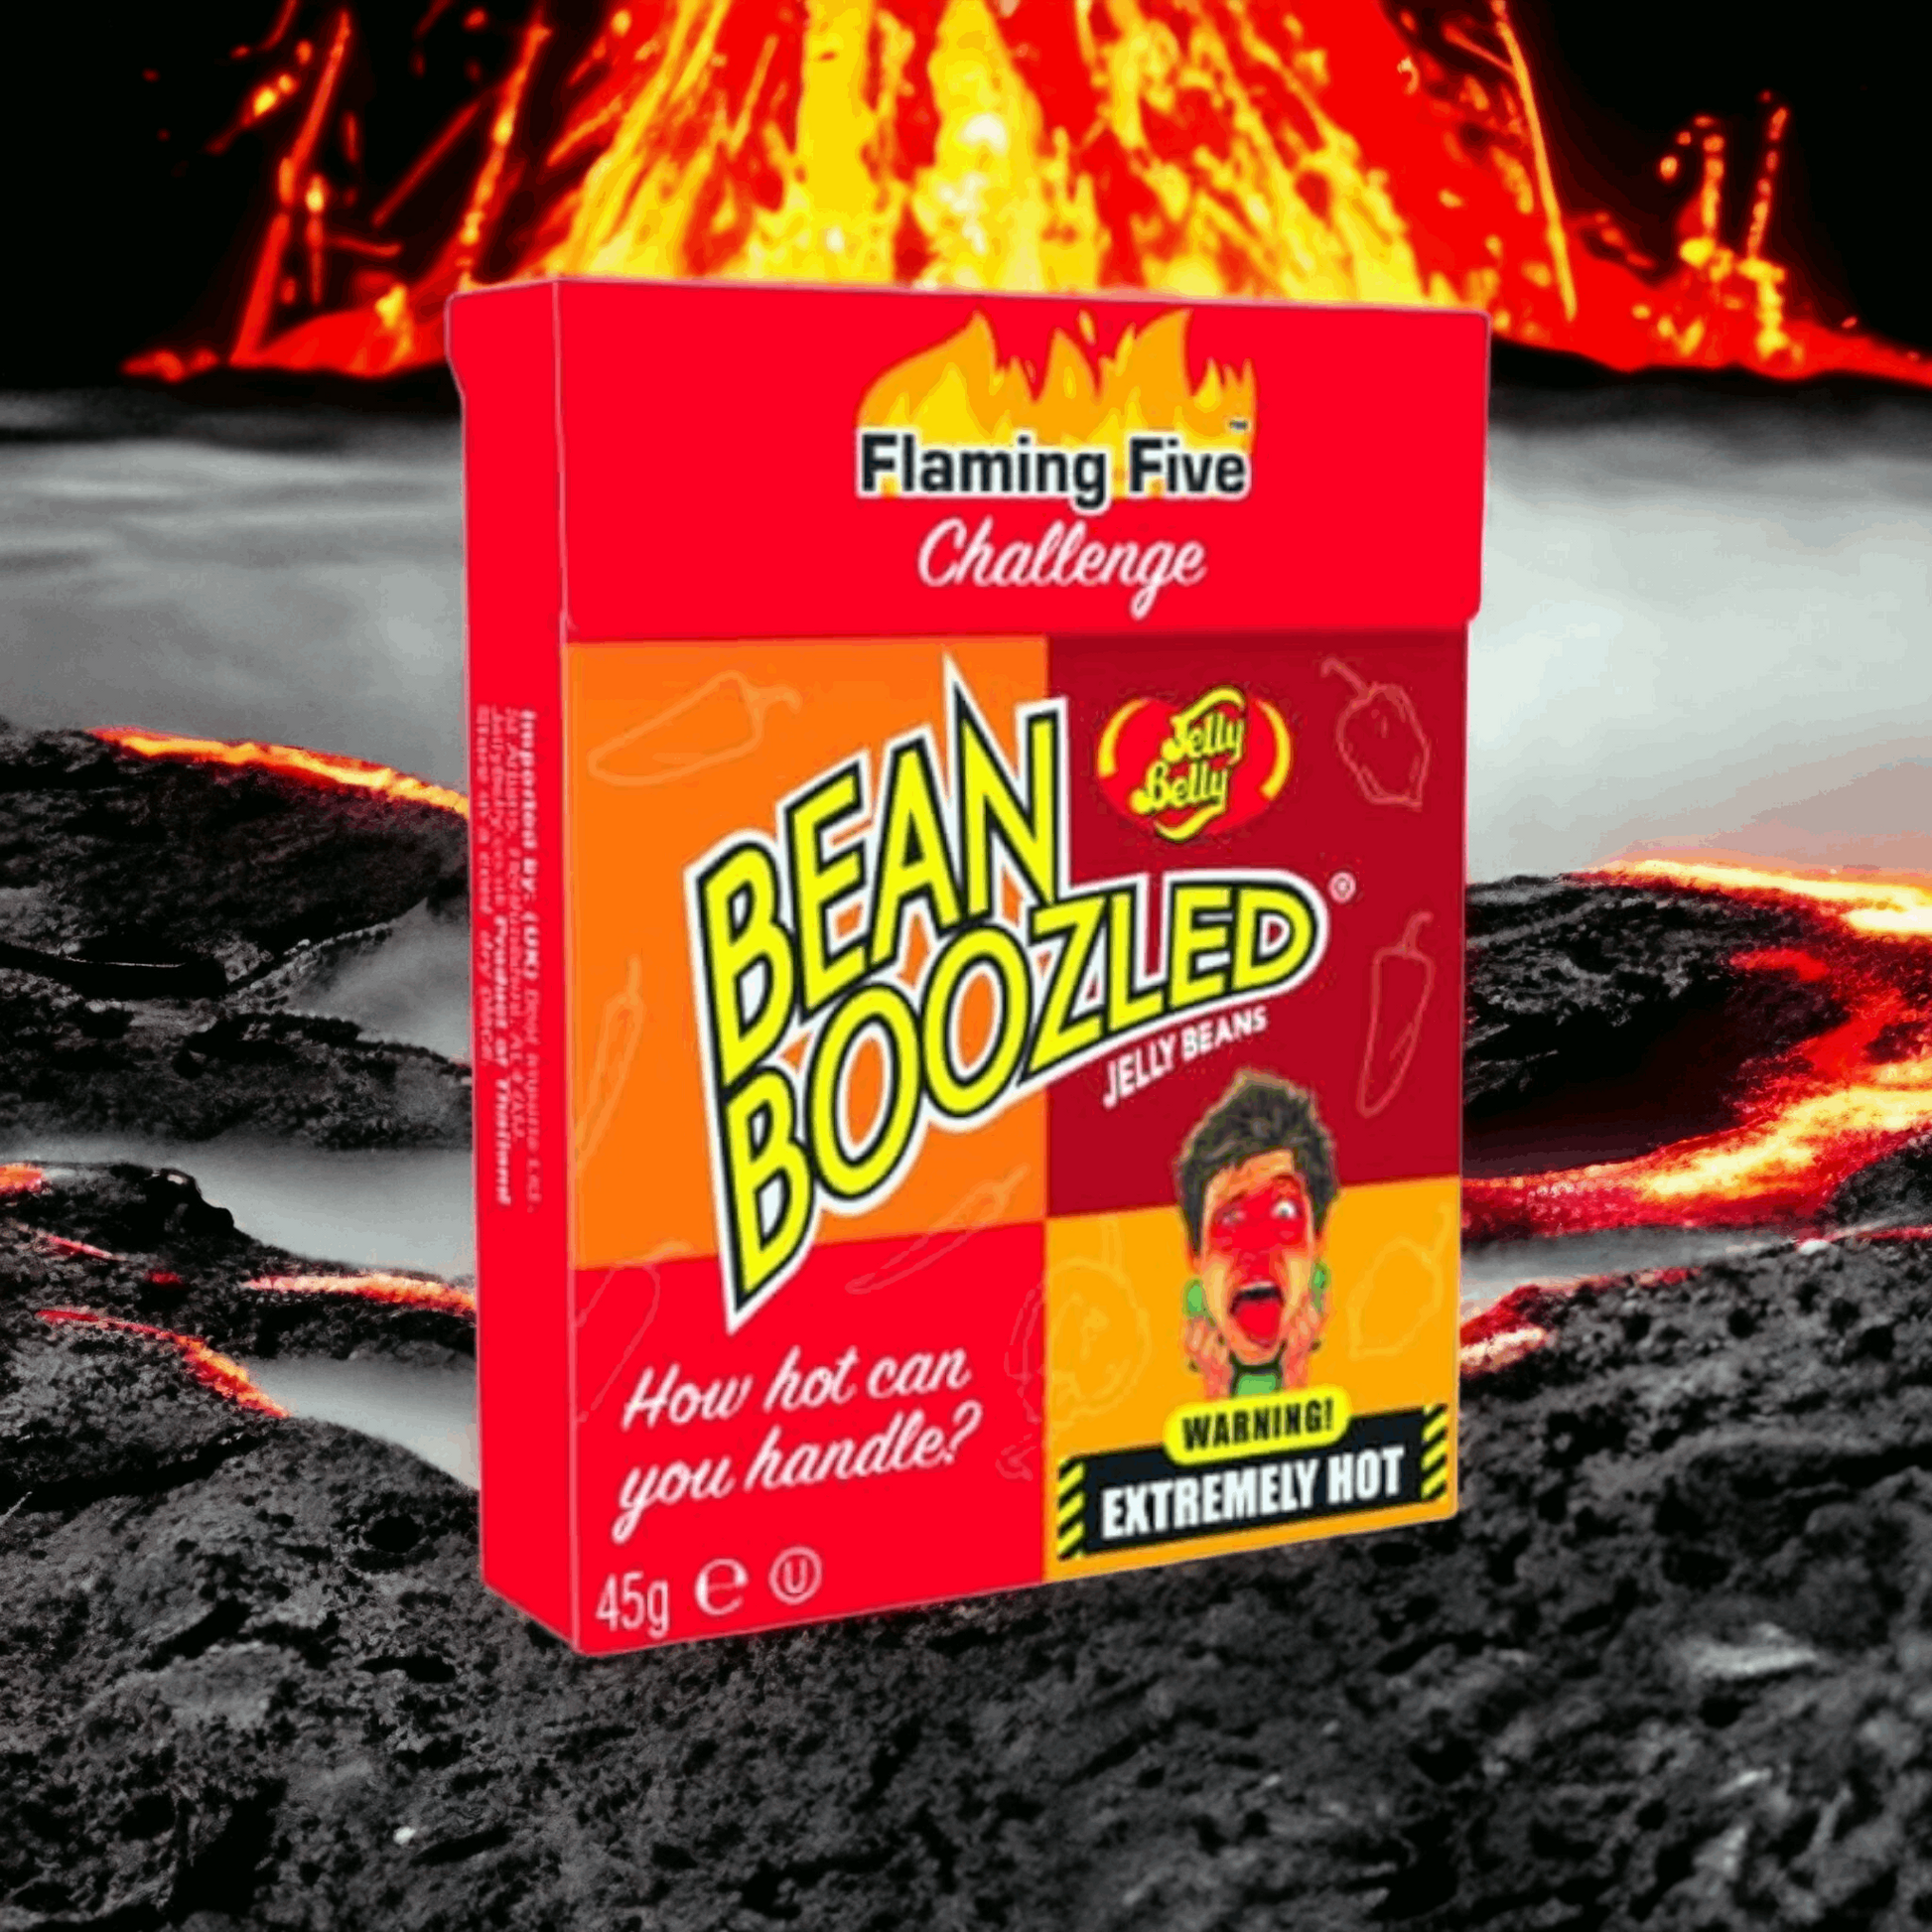 Bean Boozled Jelly Belly Flaming Five Challenge – Cadeau Empoisonné